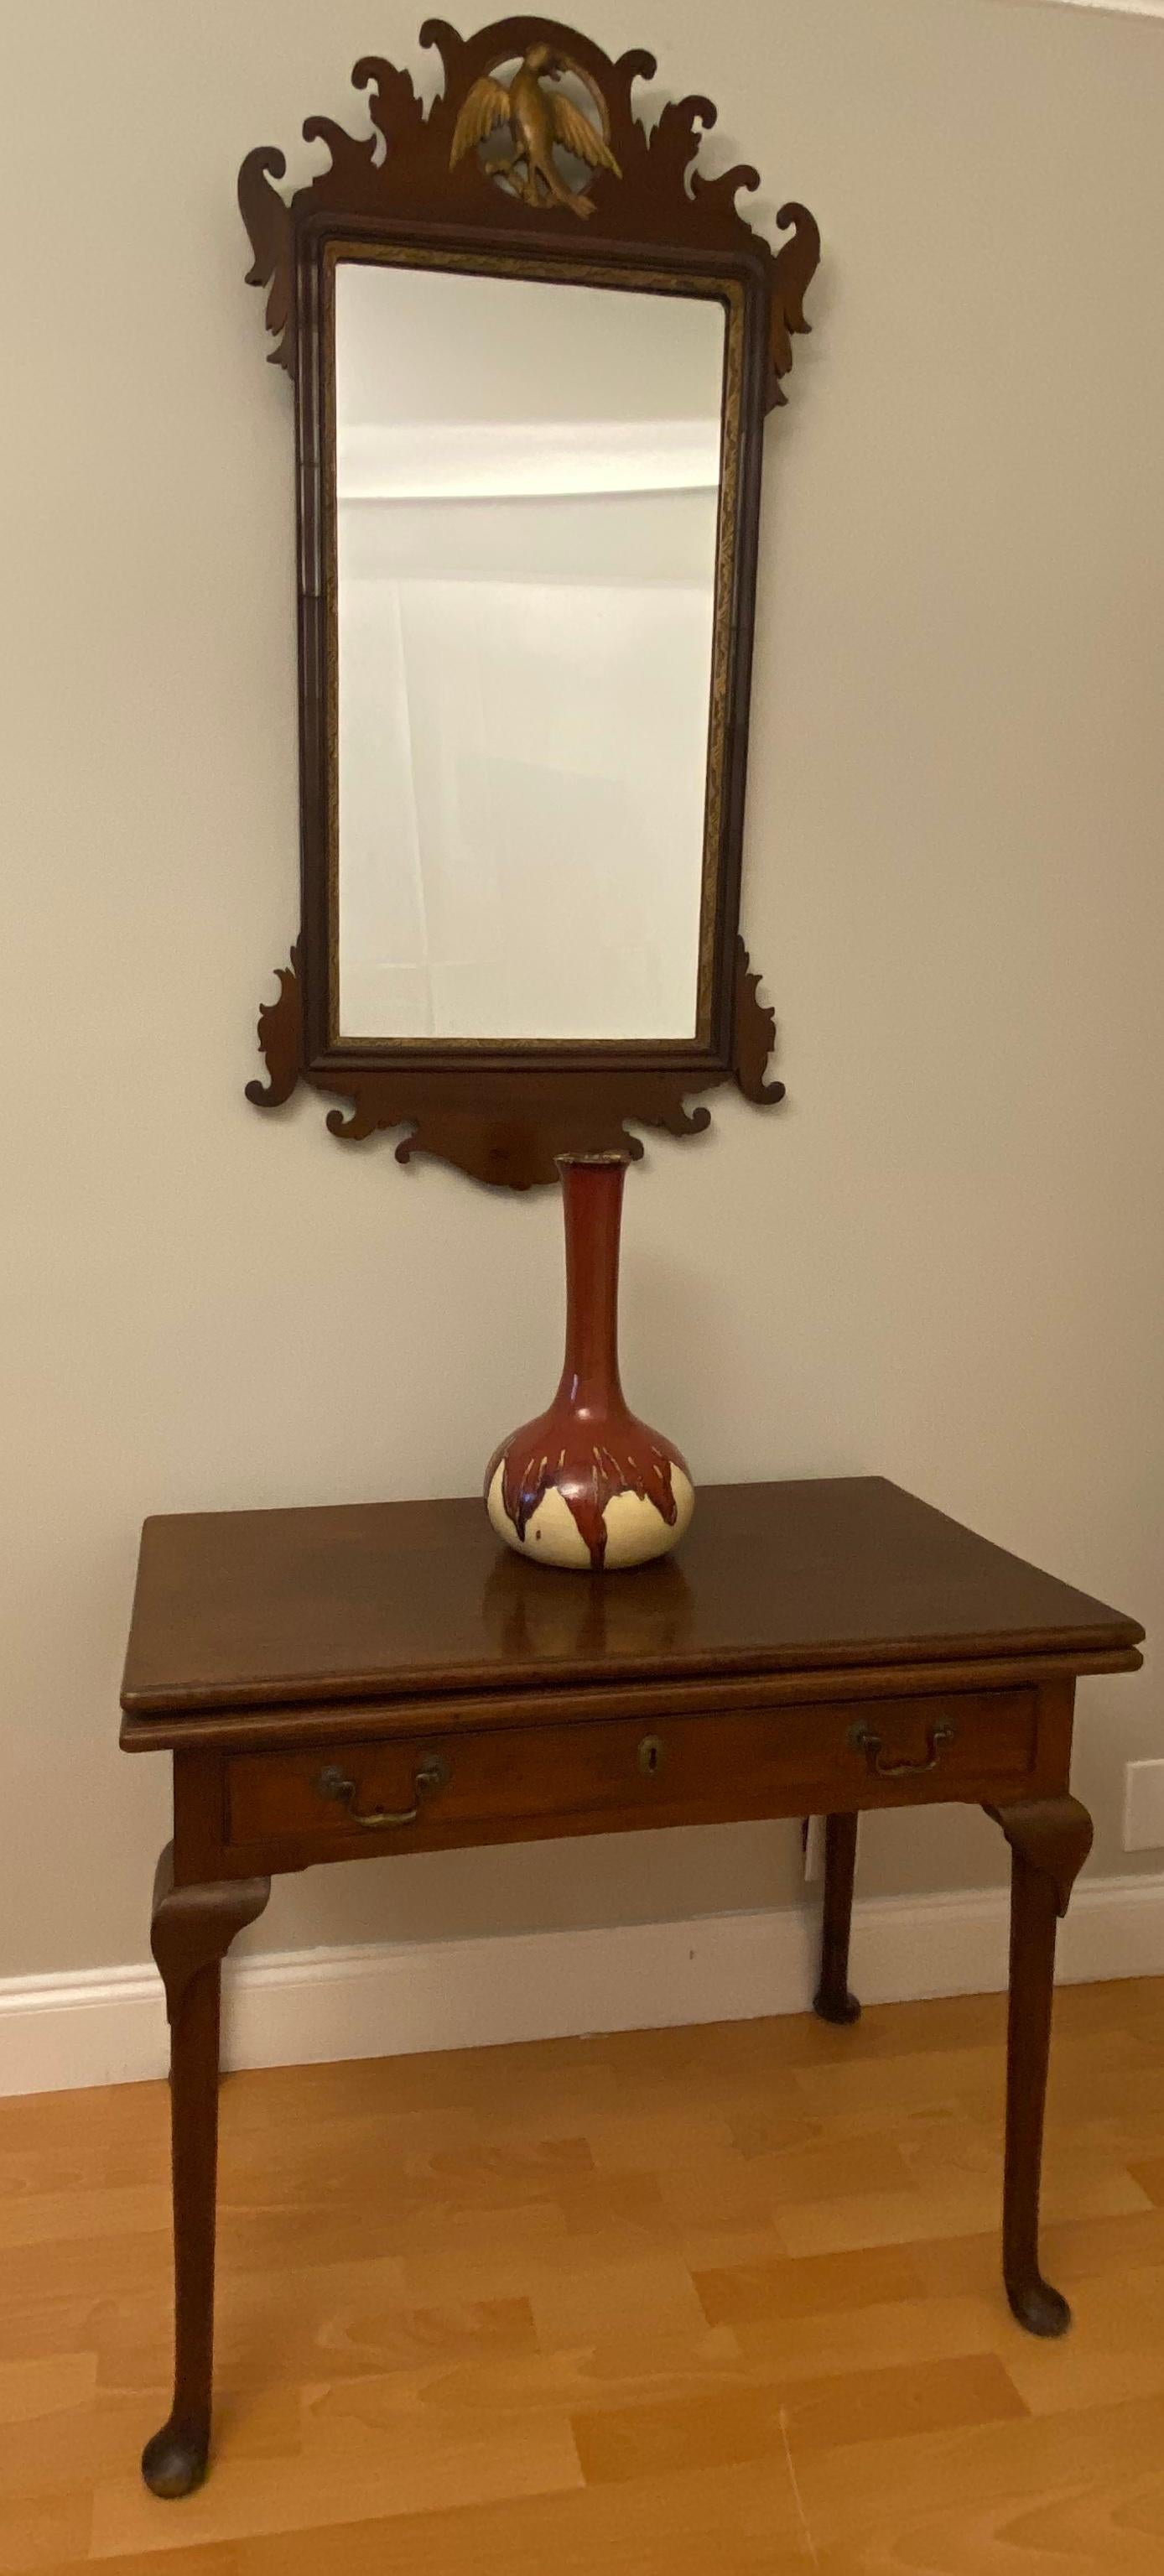 18th Century Early American Chippendale Style Wall Mirror with Eagle Pediment For Sale 5